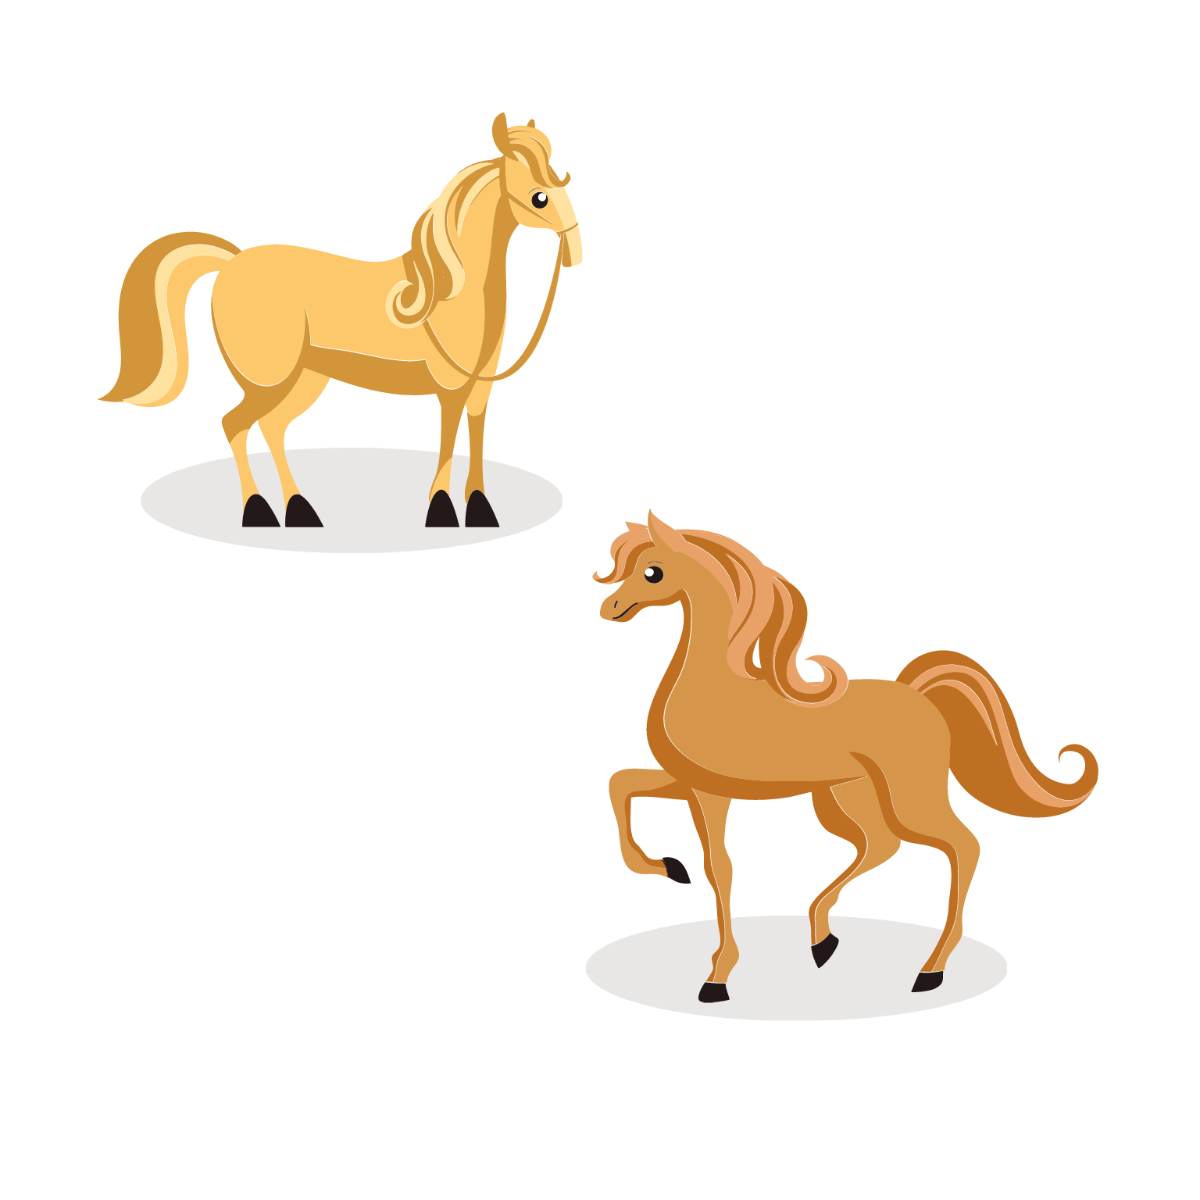 Simple Horse Vector Template